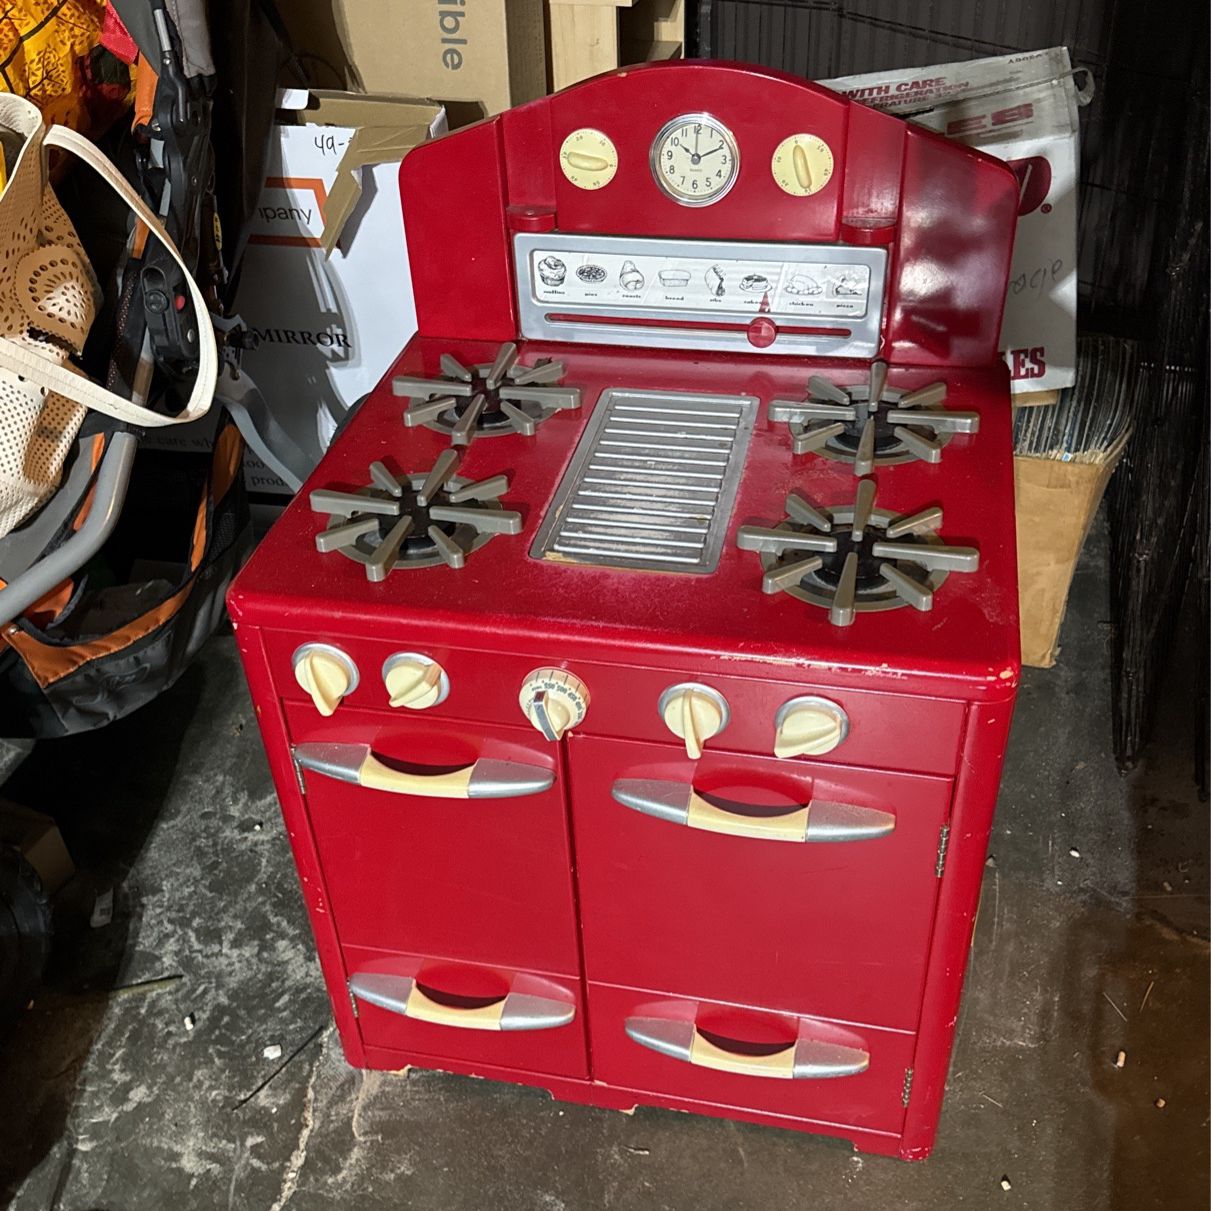 Toddlers Oven & Stove Top